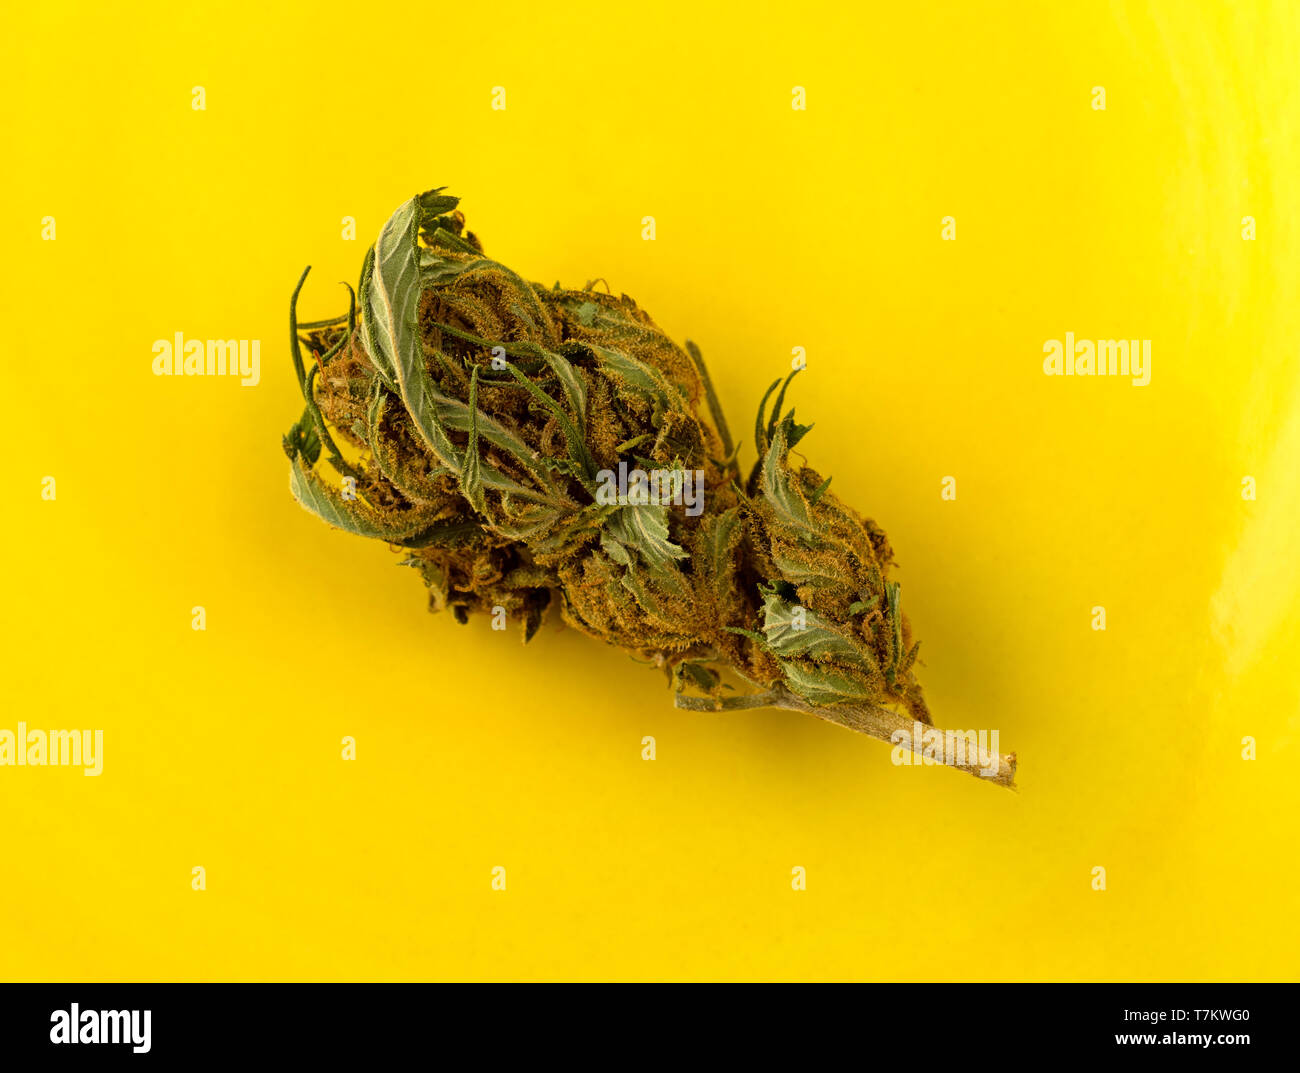 Overhead view of a marijuana bud on a yellow background illuminated with natural lighting. Stock Photo